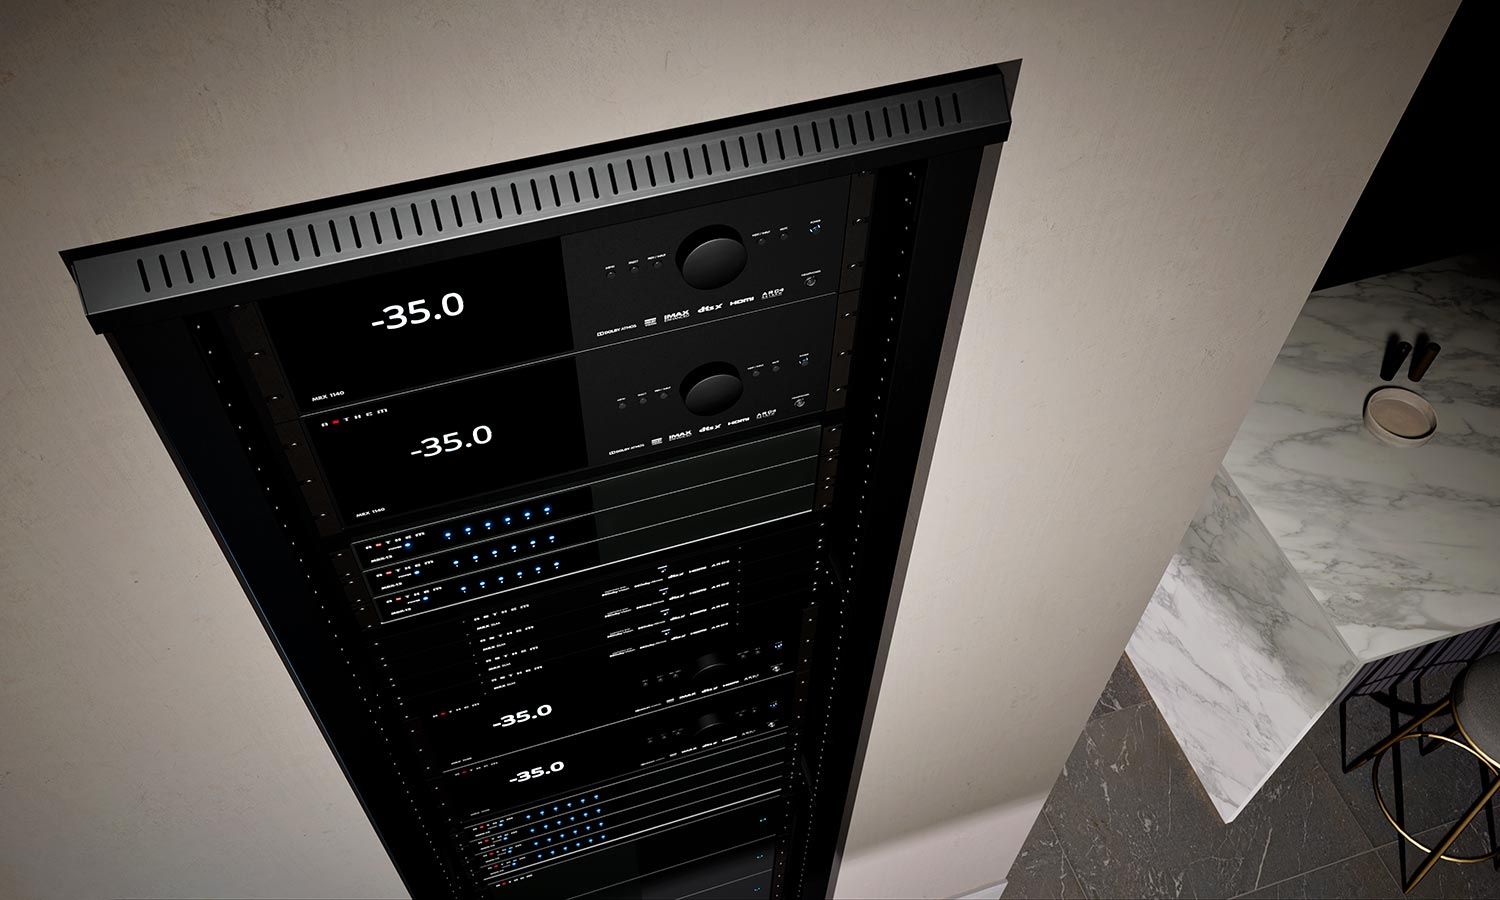 A rack-mounted audio system displaying several black components with digital volume indicators set to -35.0, highlighting a sleek and modern home audio setup.